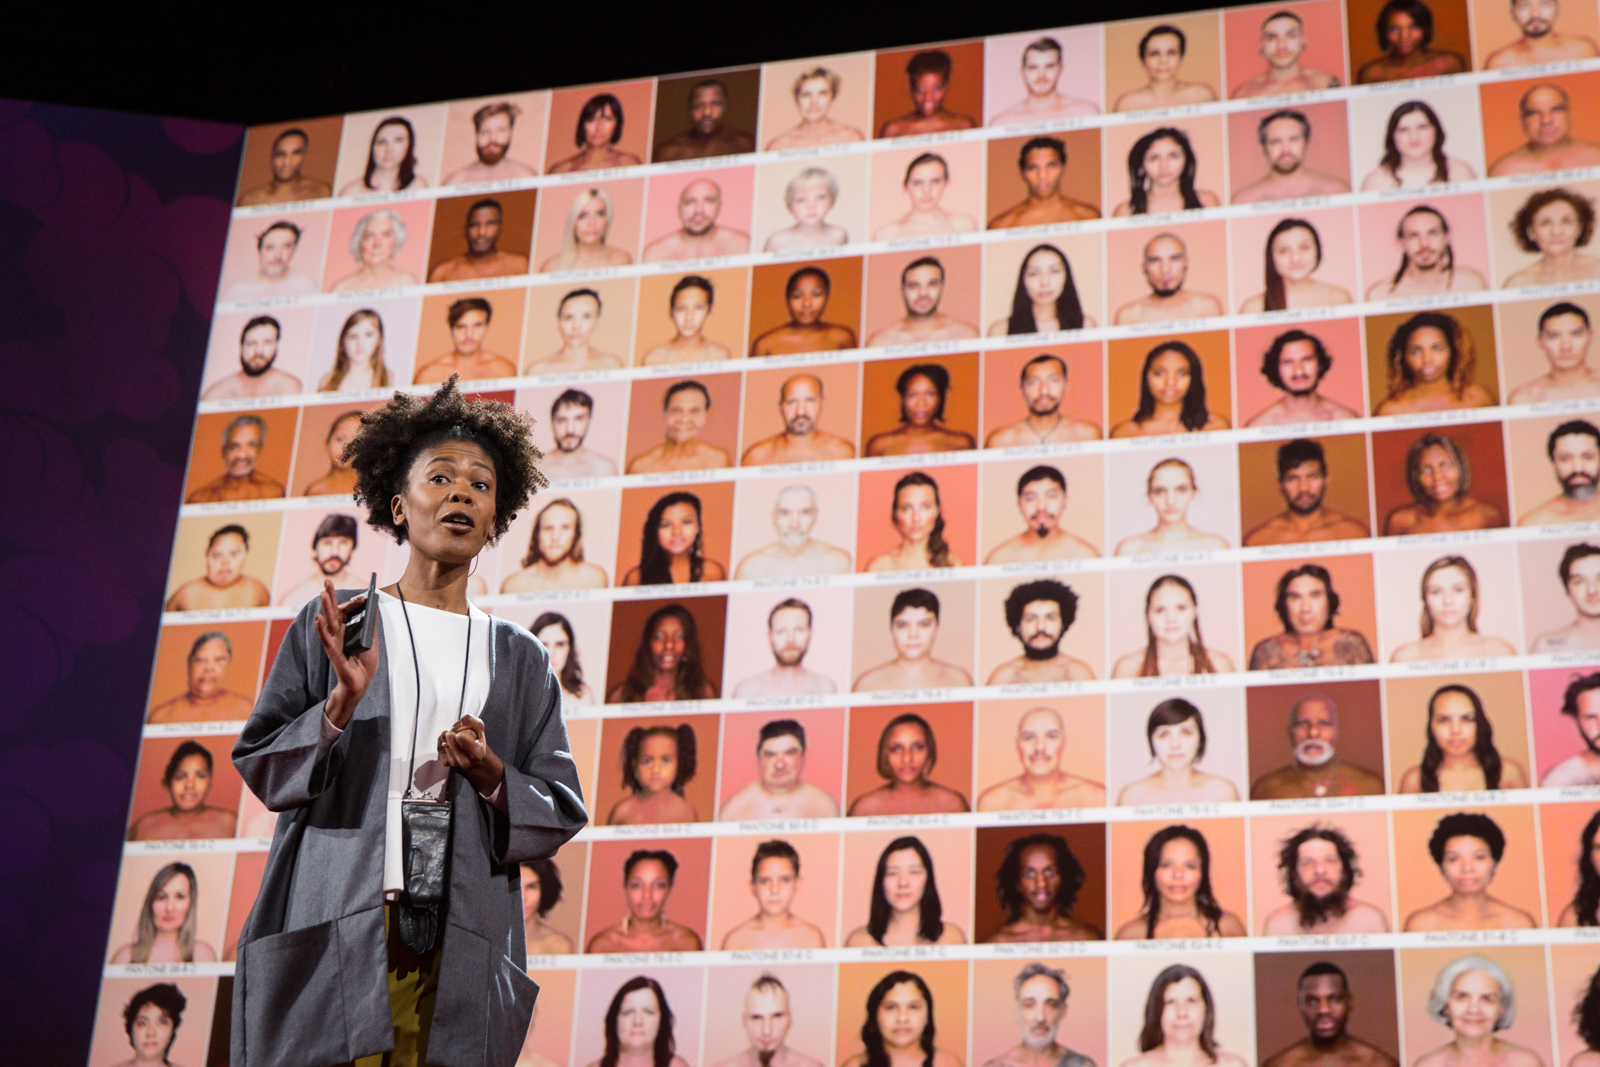 Pantone chips for skin color: Angélica Dass reveals her art at TED2016 |  TED Blog